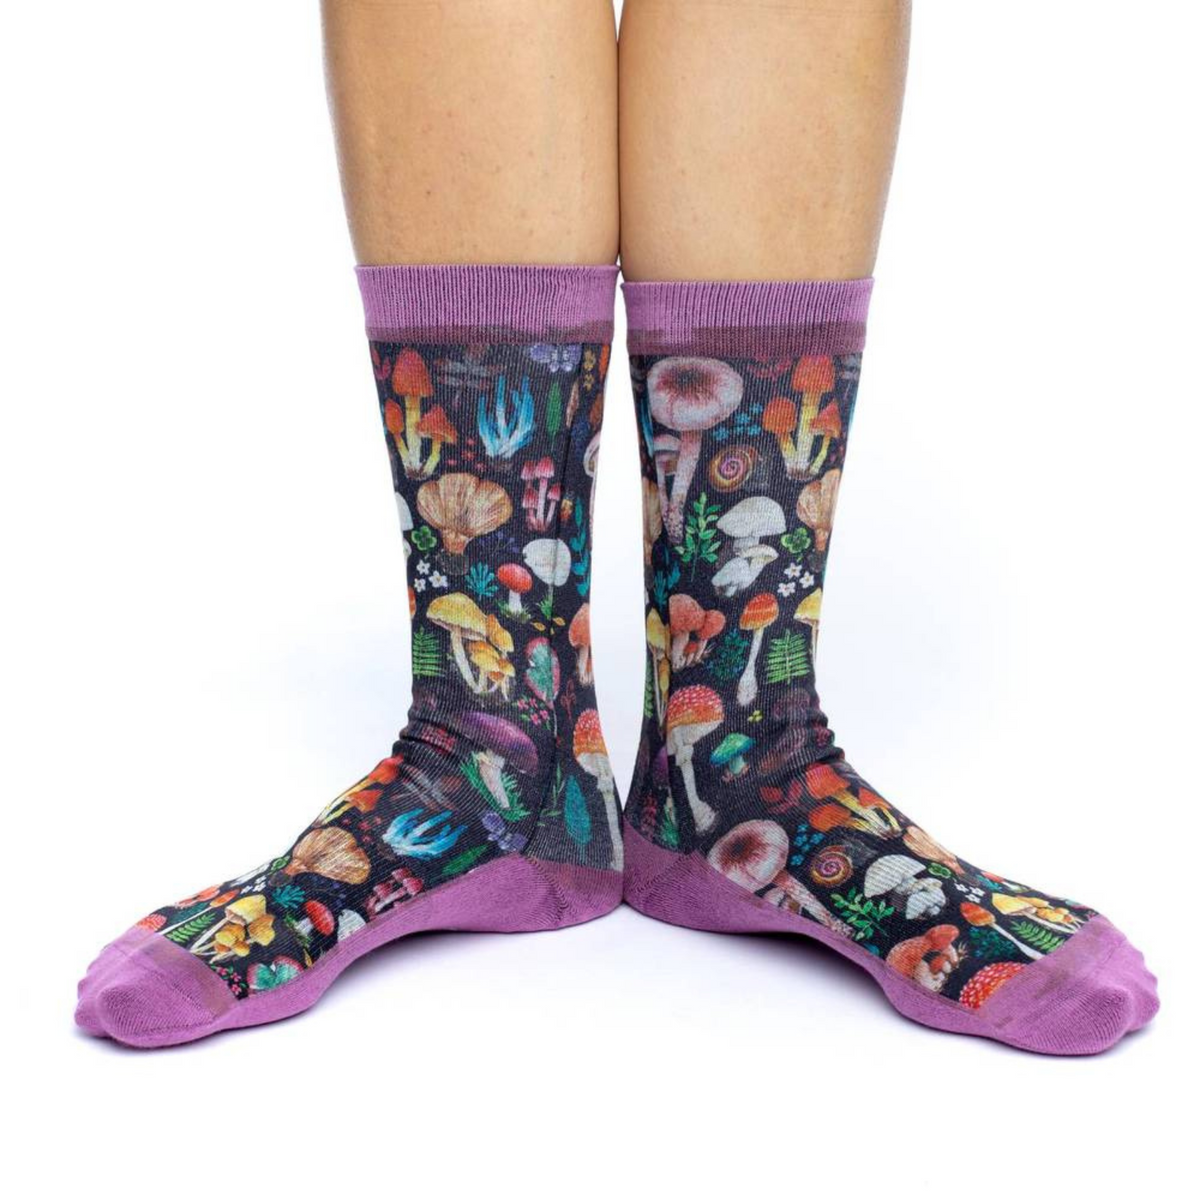 Good Luck Sock Mushroom women&#39;s socks featuring different types of mushrooms on black background on display with pink cuff, heel and toe on model